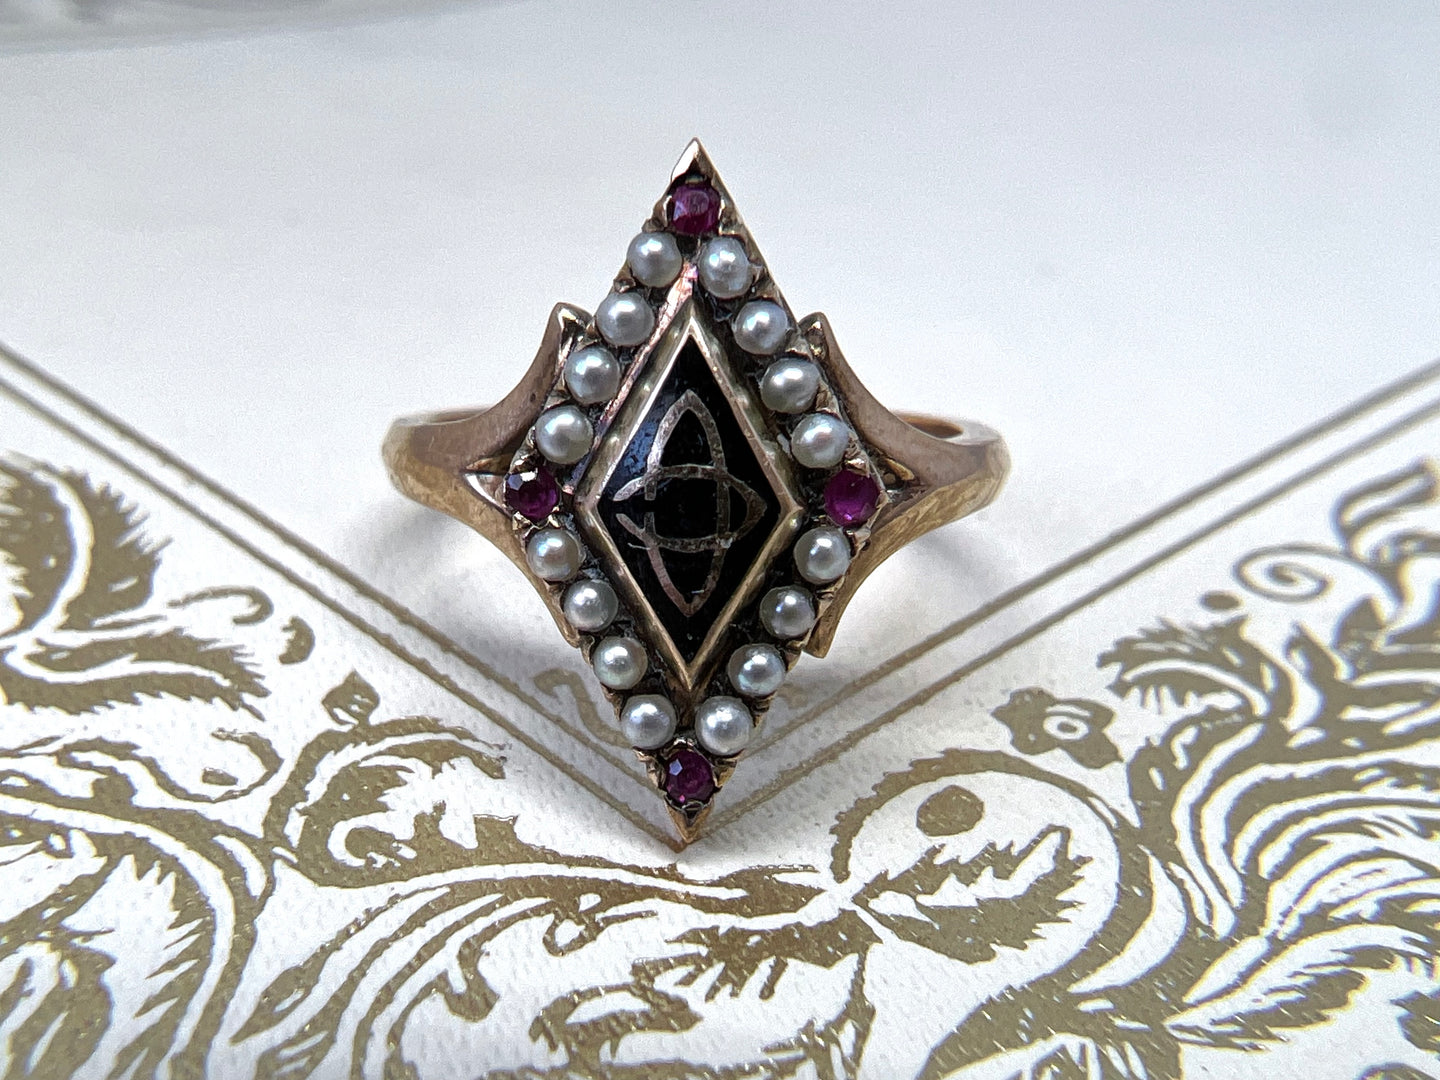 ANTIQUE FRATERNITY CONVERSION RING IN 14KT GOLD